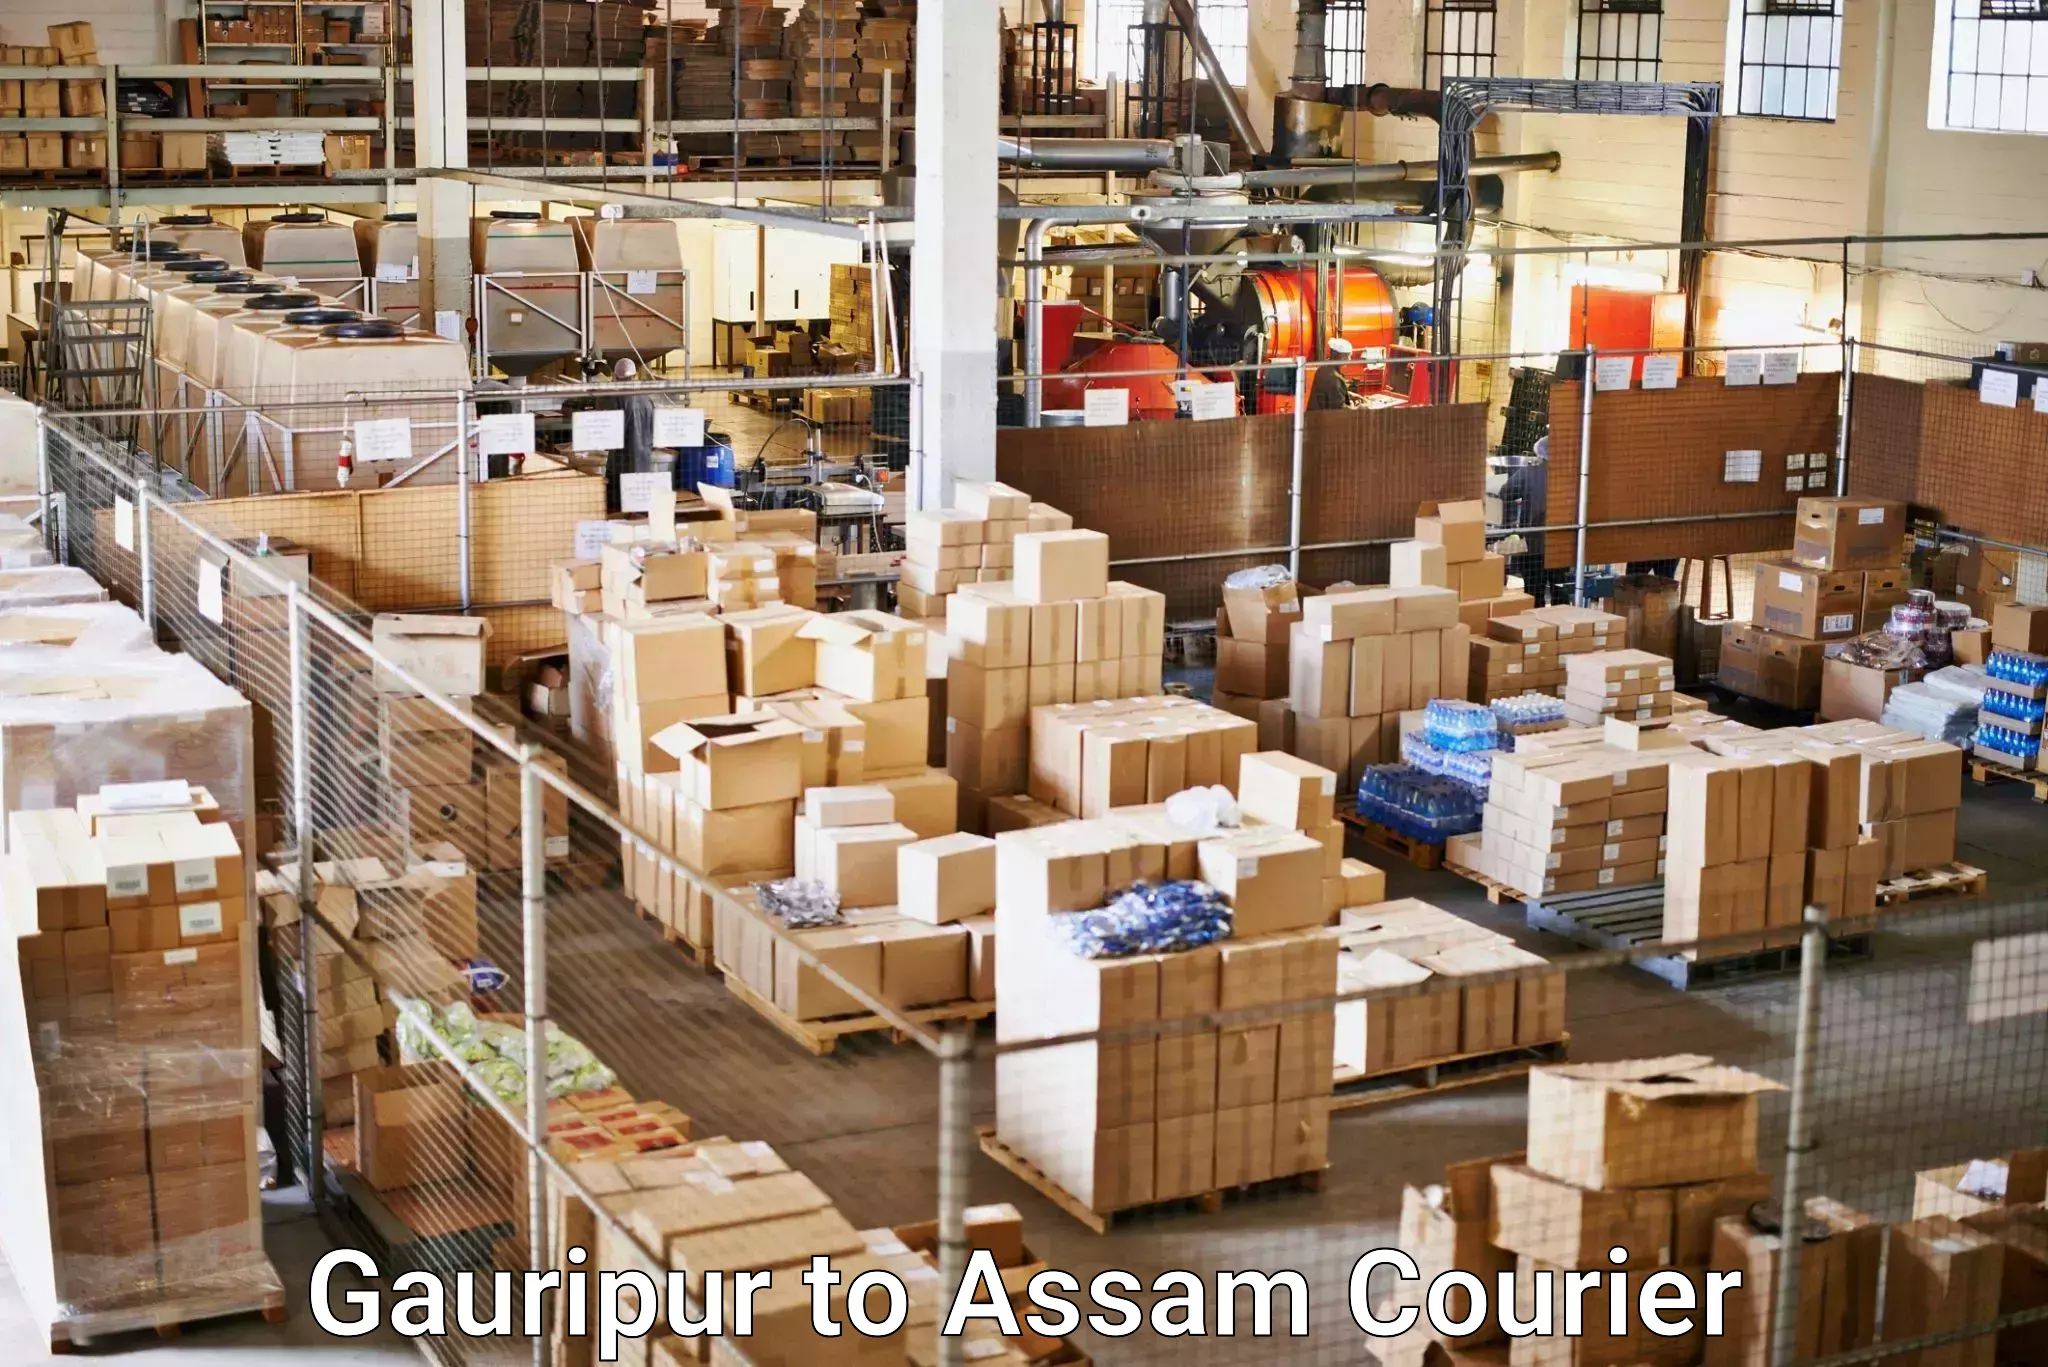 Speedy delivery service Gauripur to Kamrup